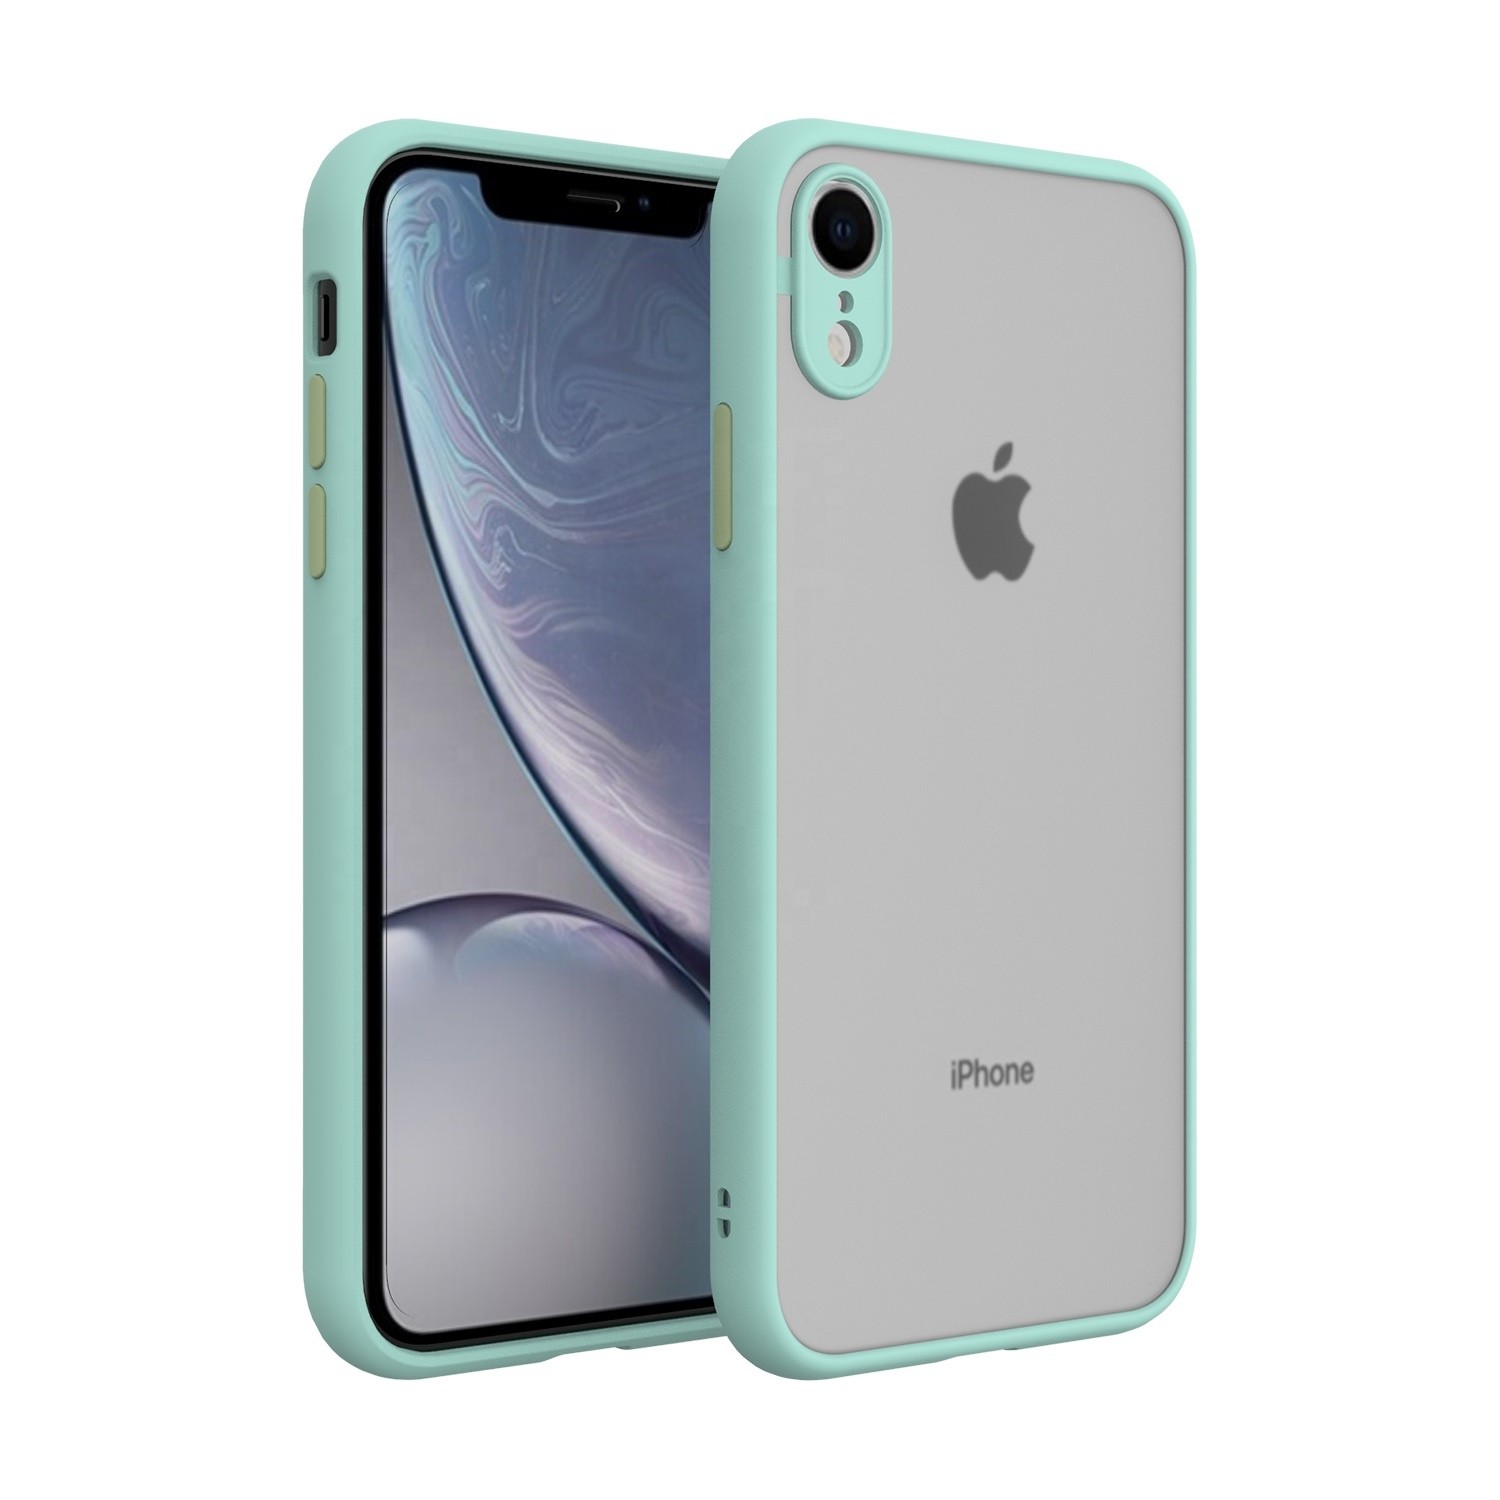 Cellphone Case Factory Translucent Matte Mobail Cover TPU PC Other Mobile Phone Accessories for Apple iPhone XR 11 Pro Max XS X